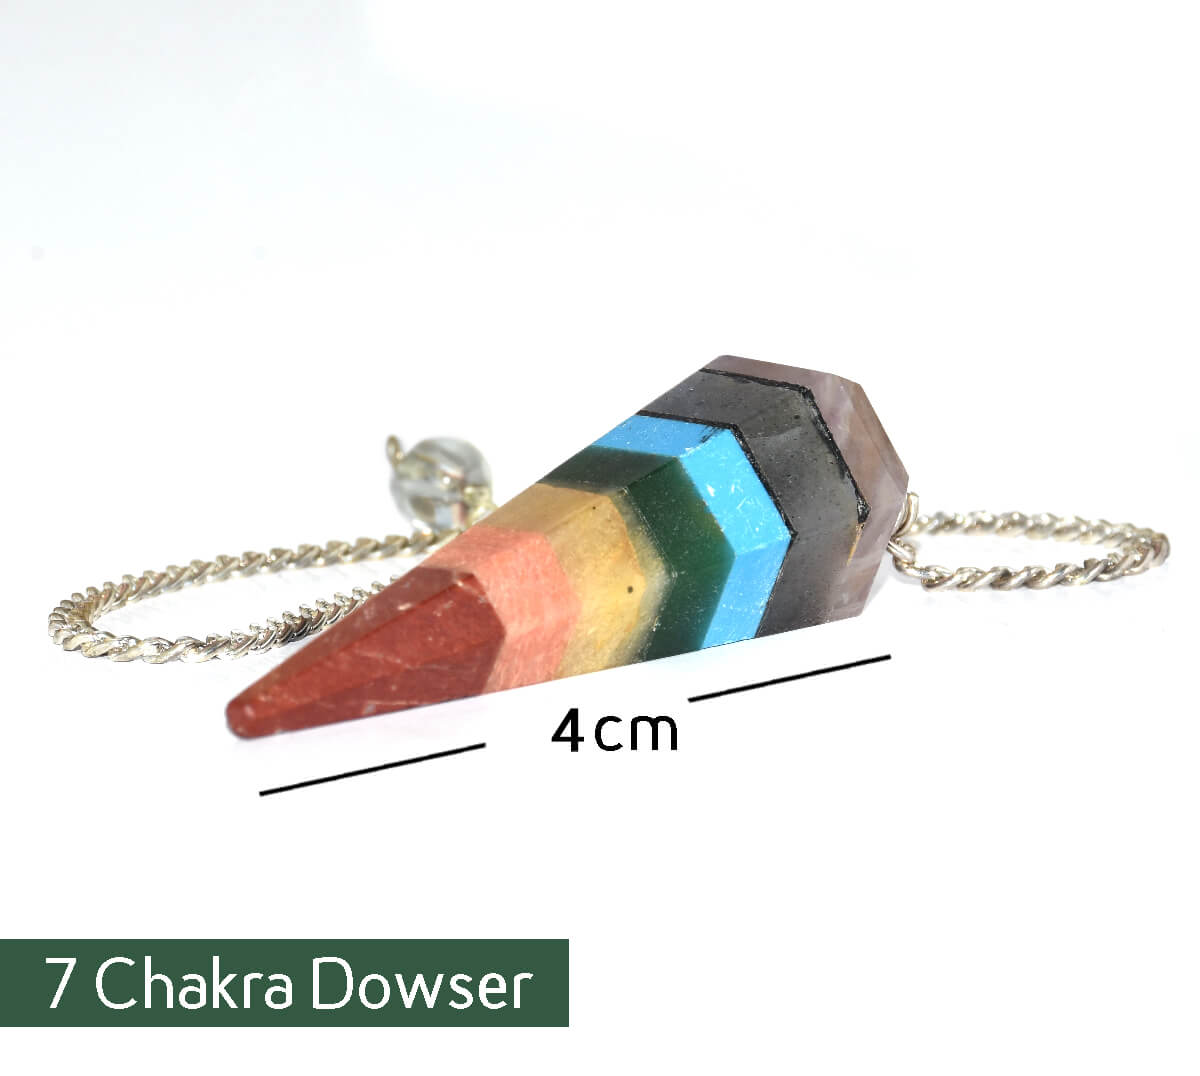 Seven Chakra Dowser Crystal Natural pendulum with Chain 1pc Decorative Showpiece - 11 cm  (Crystal, Multicolor)